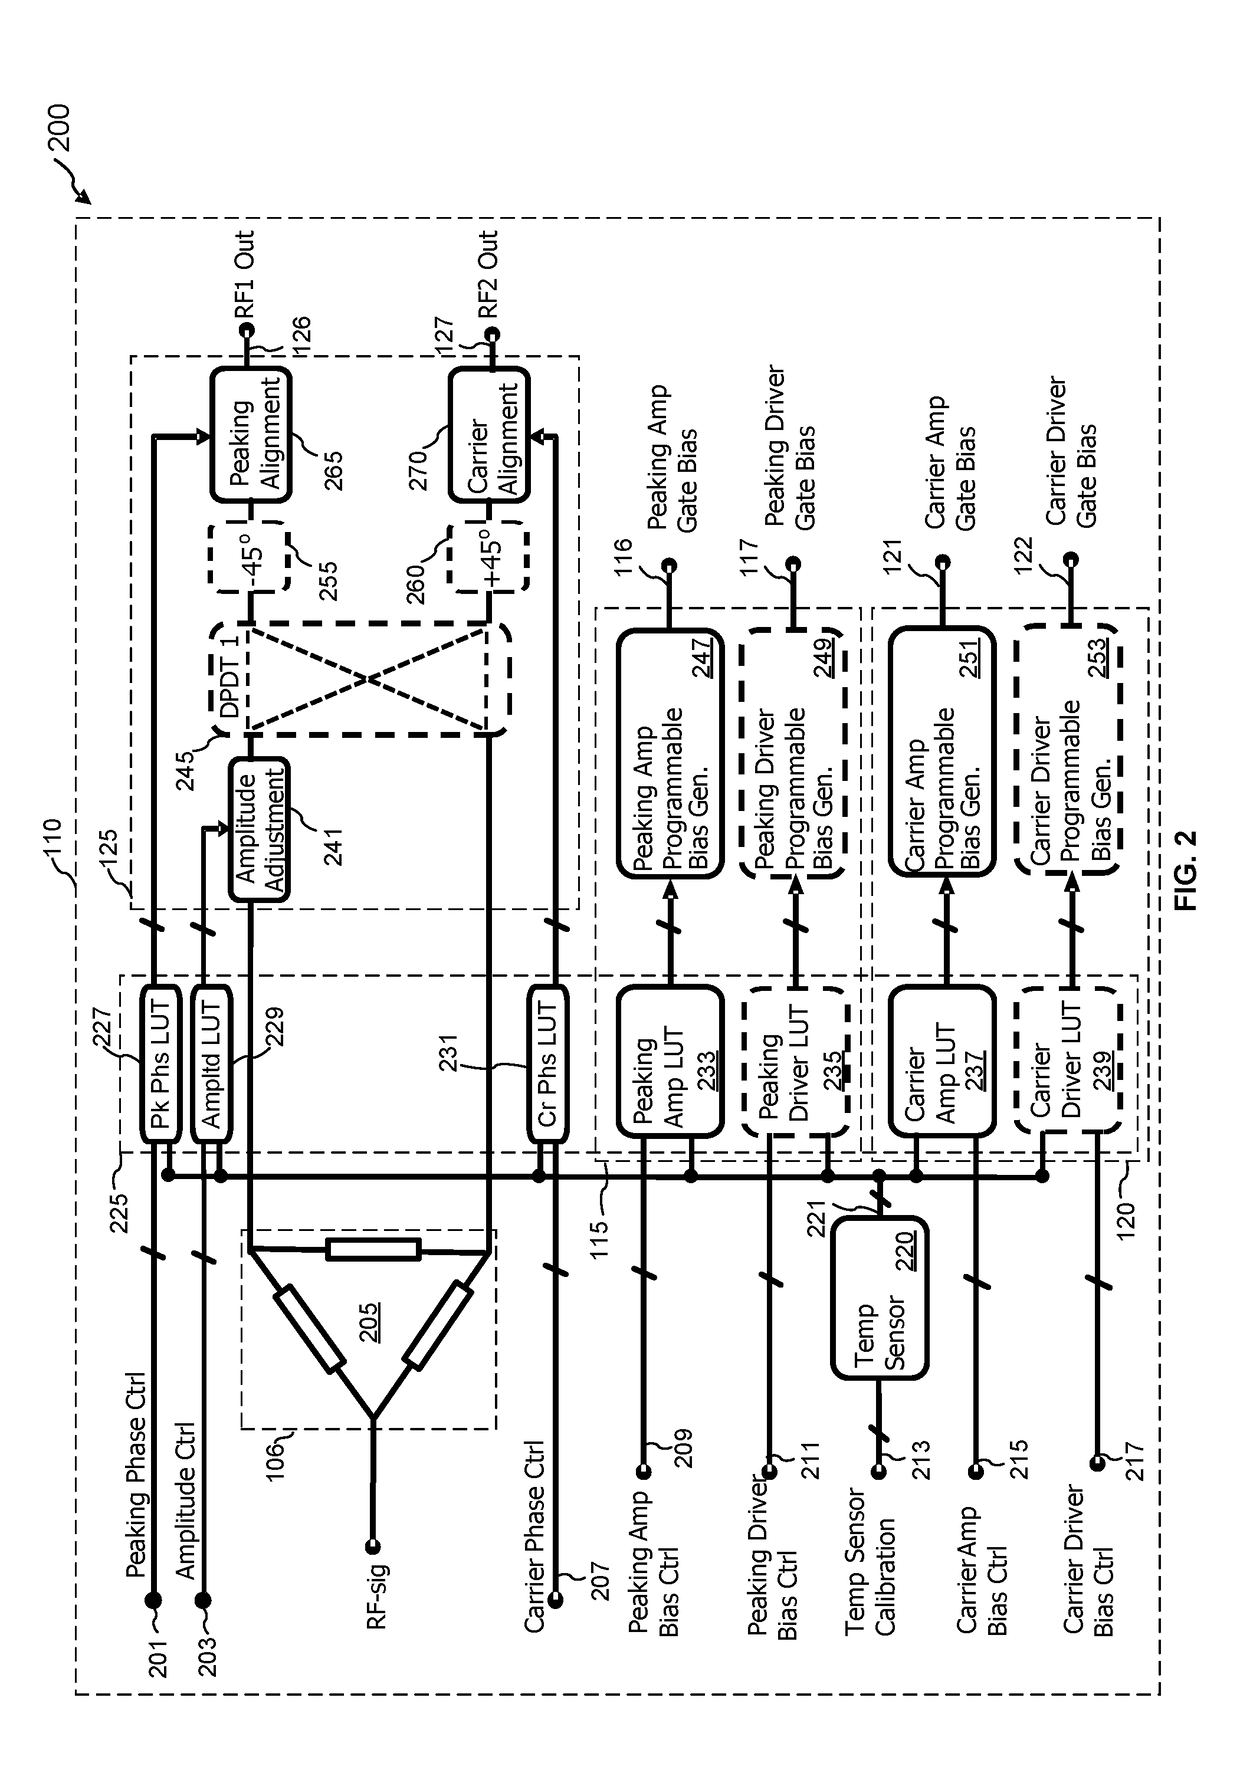 Phase, amplitude and gate-bias optimizer for doherty amplifier